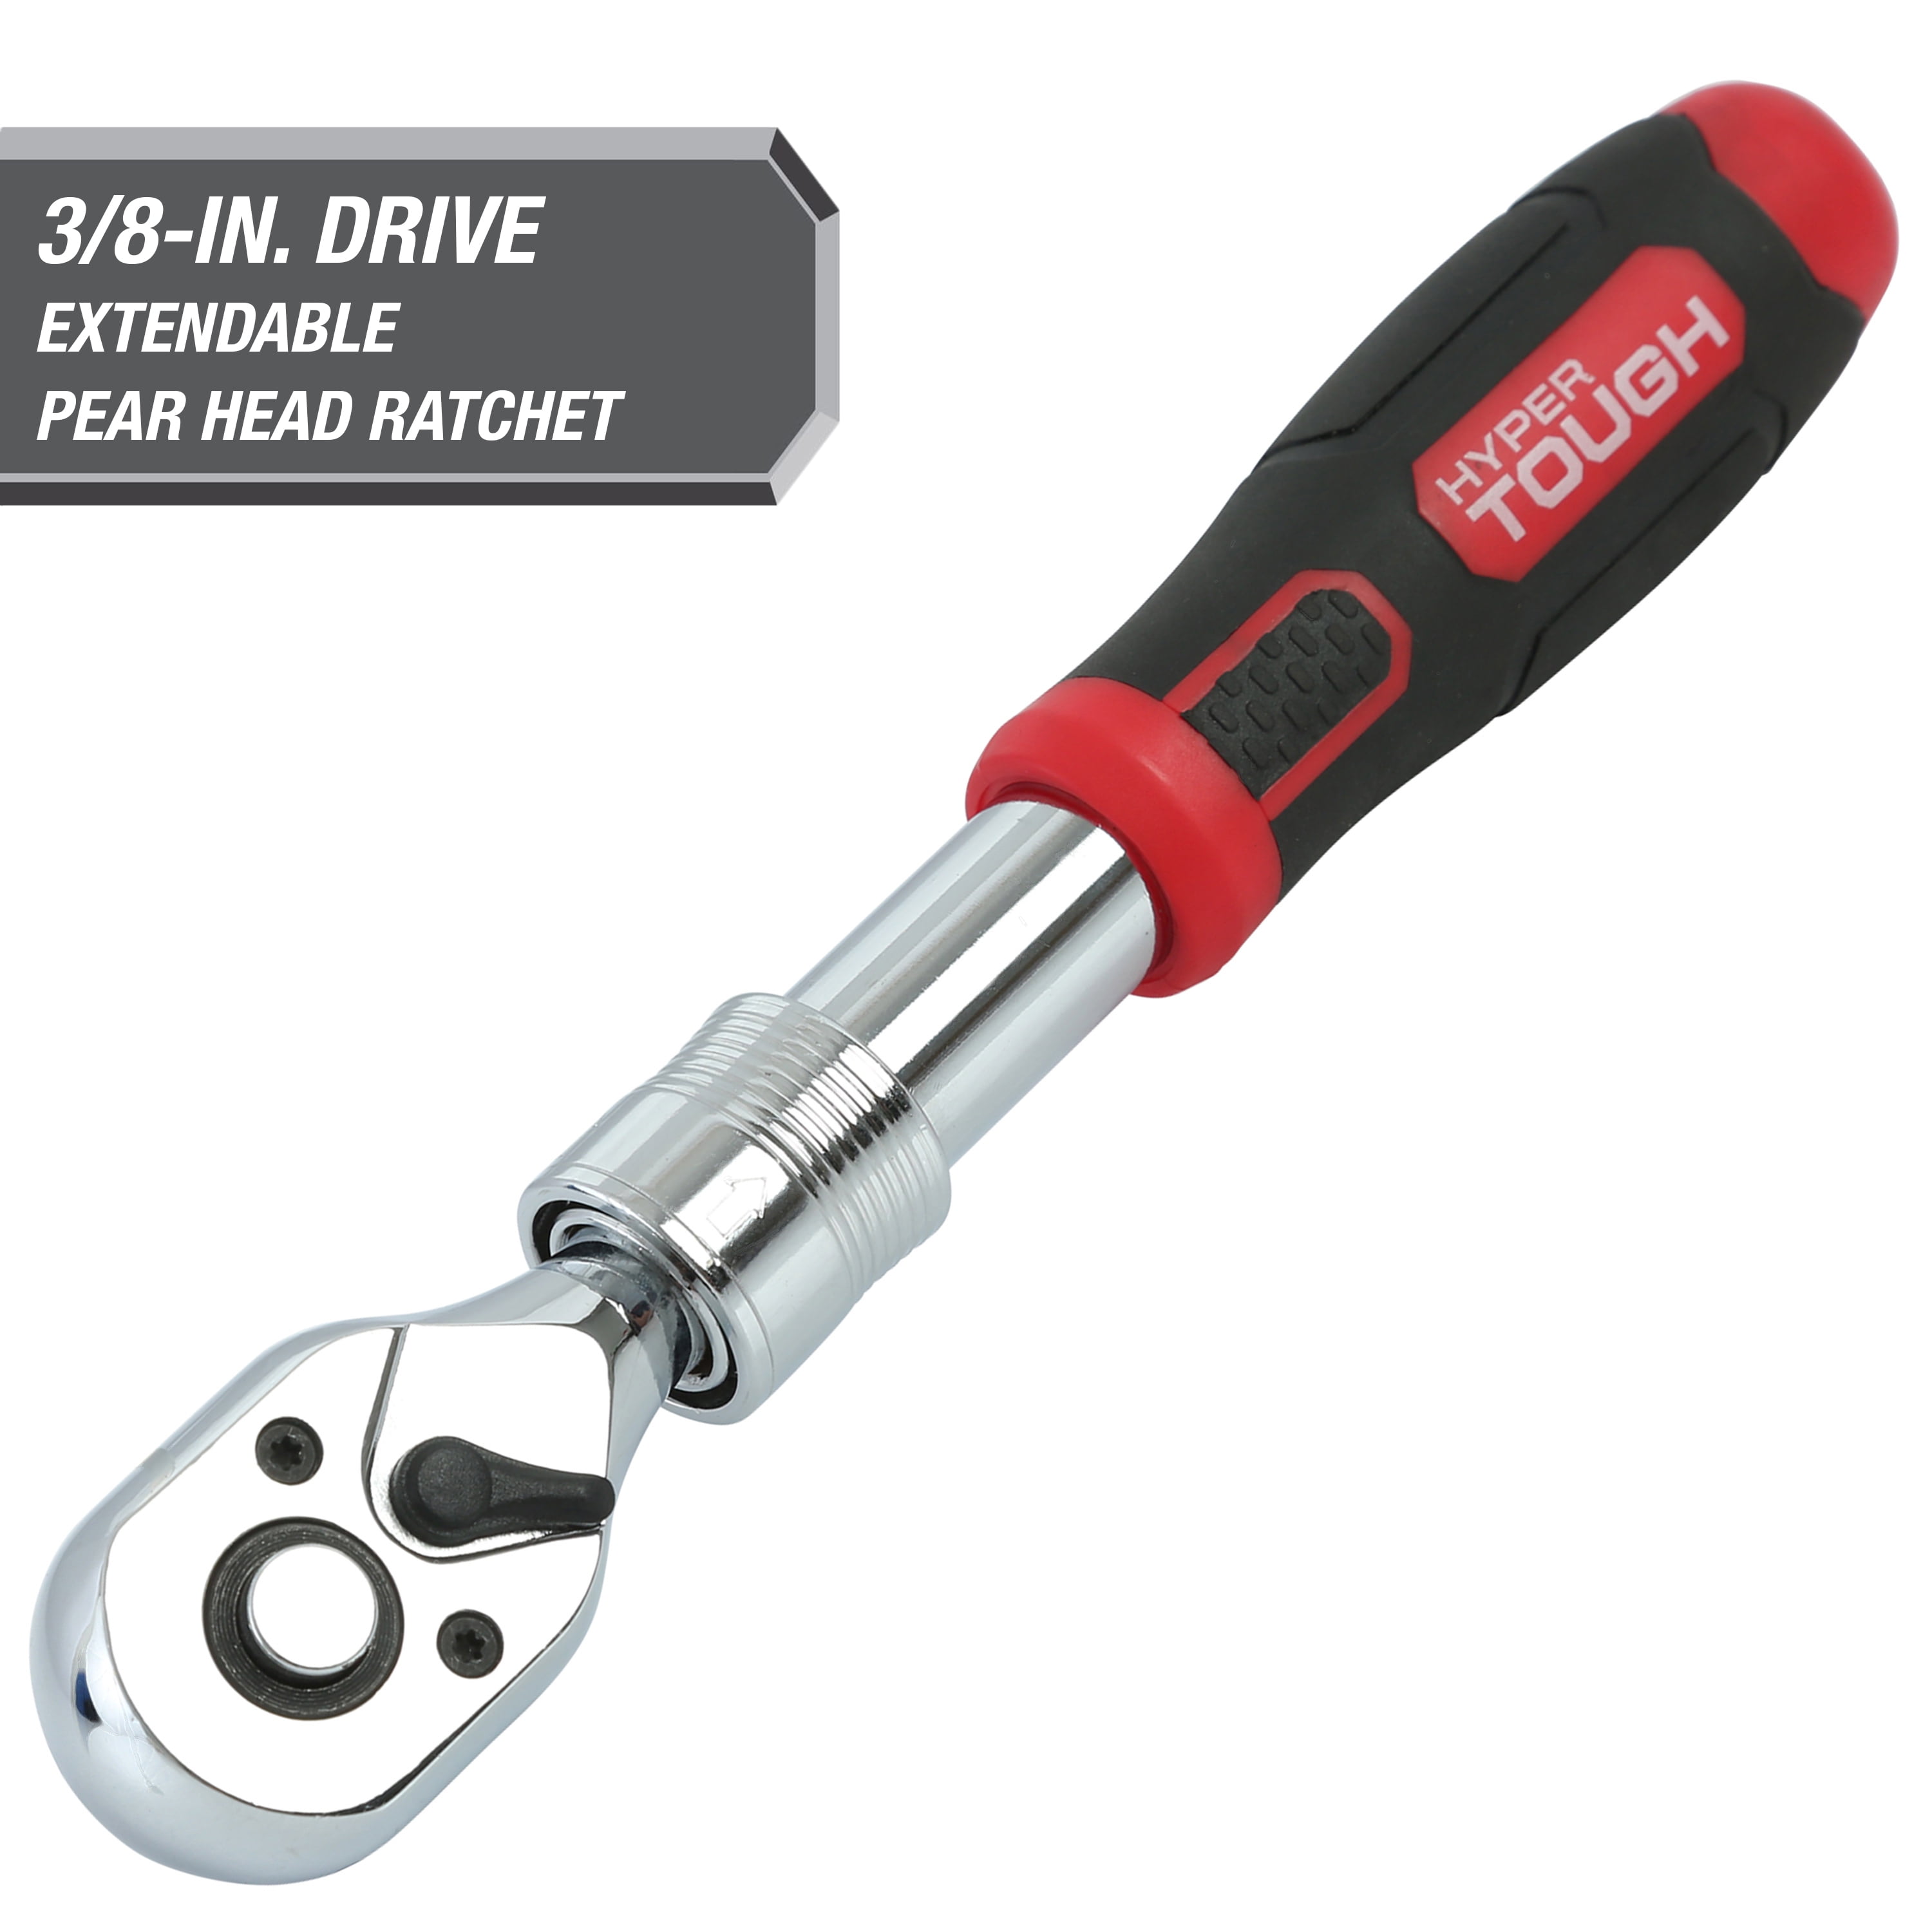 Hyper Tough 3/8-inch, 72-Tooth,  5-Degree arc swing Pear Head Ratchet with Extendable 12-inch Handle